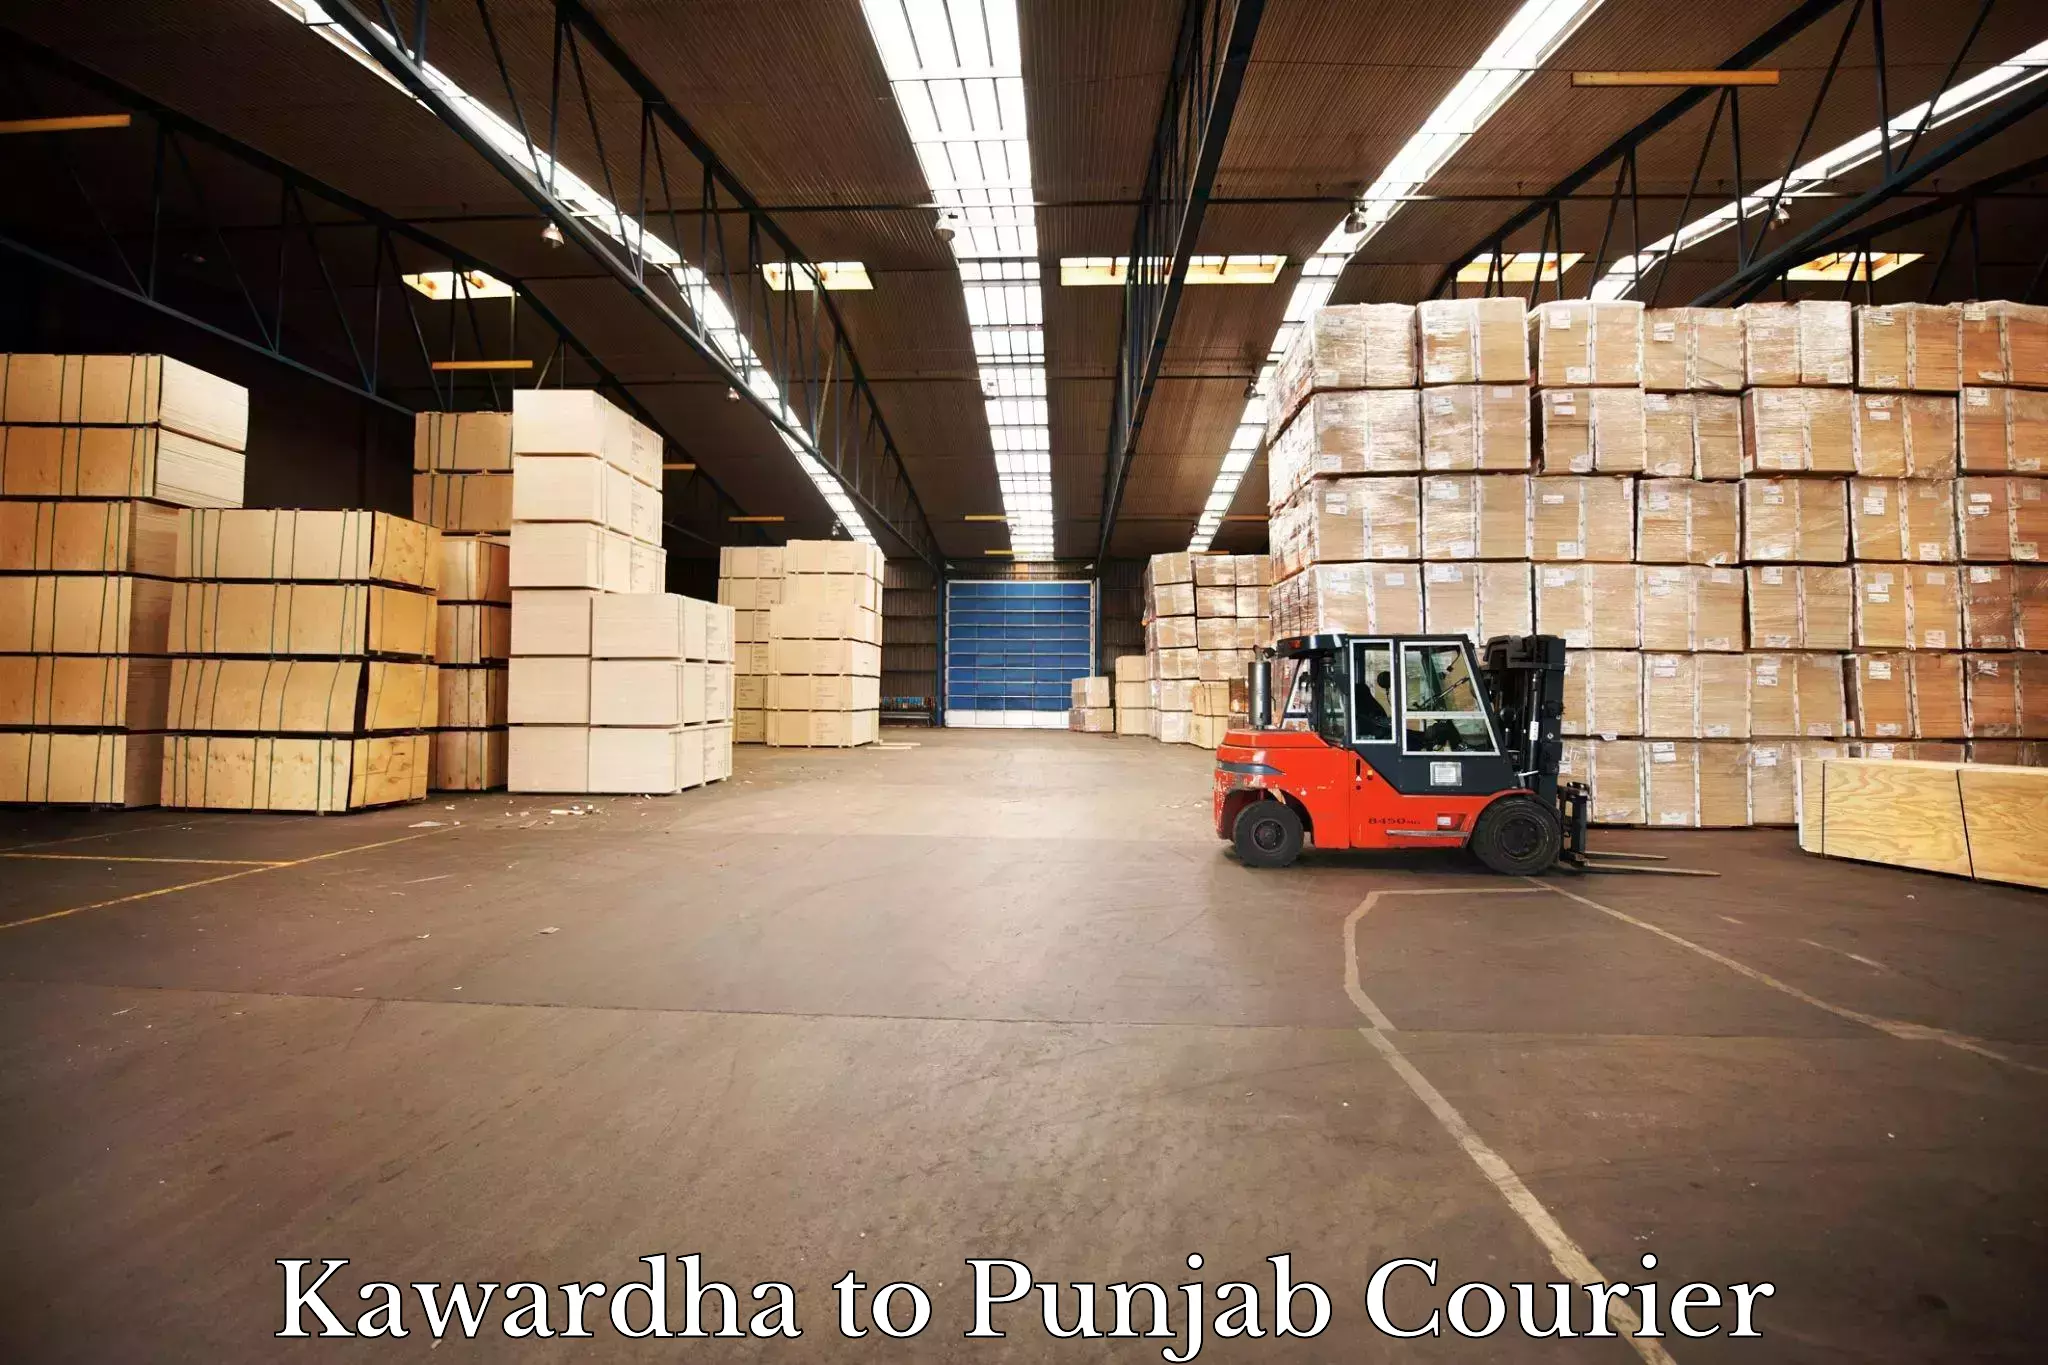 End-to-end delivery in Kawardha to Punjab